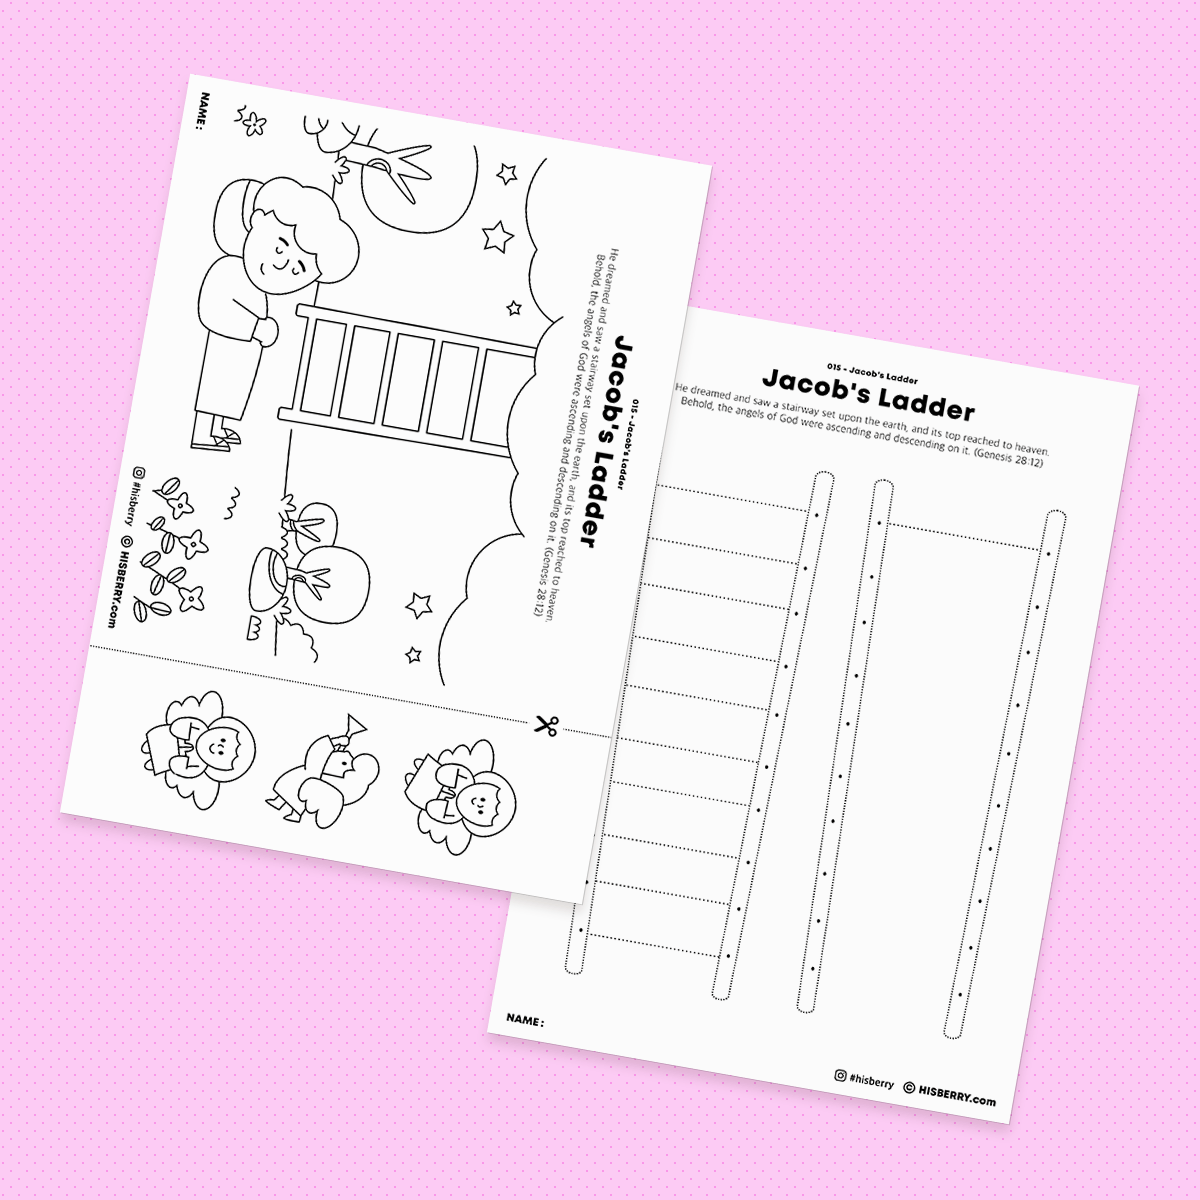 Jacob's Ladder - Drawing Coloring Pages Printable